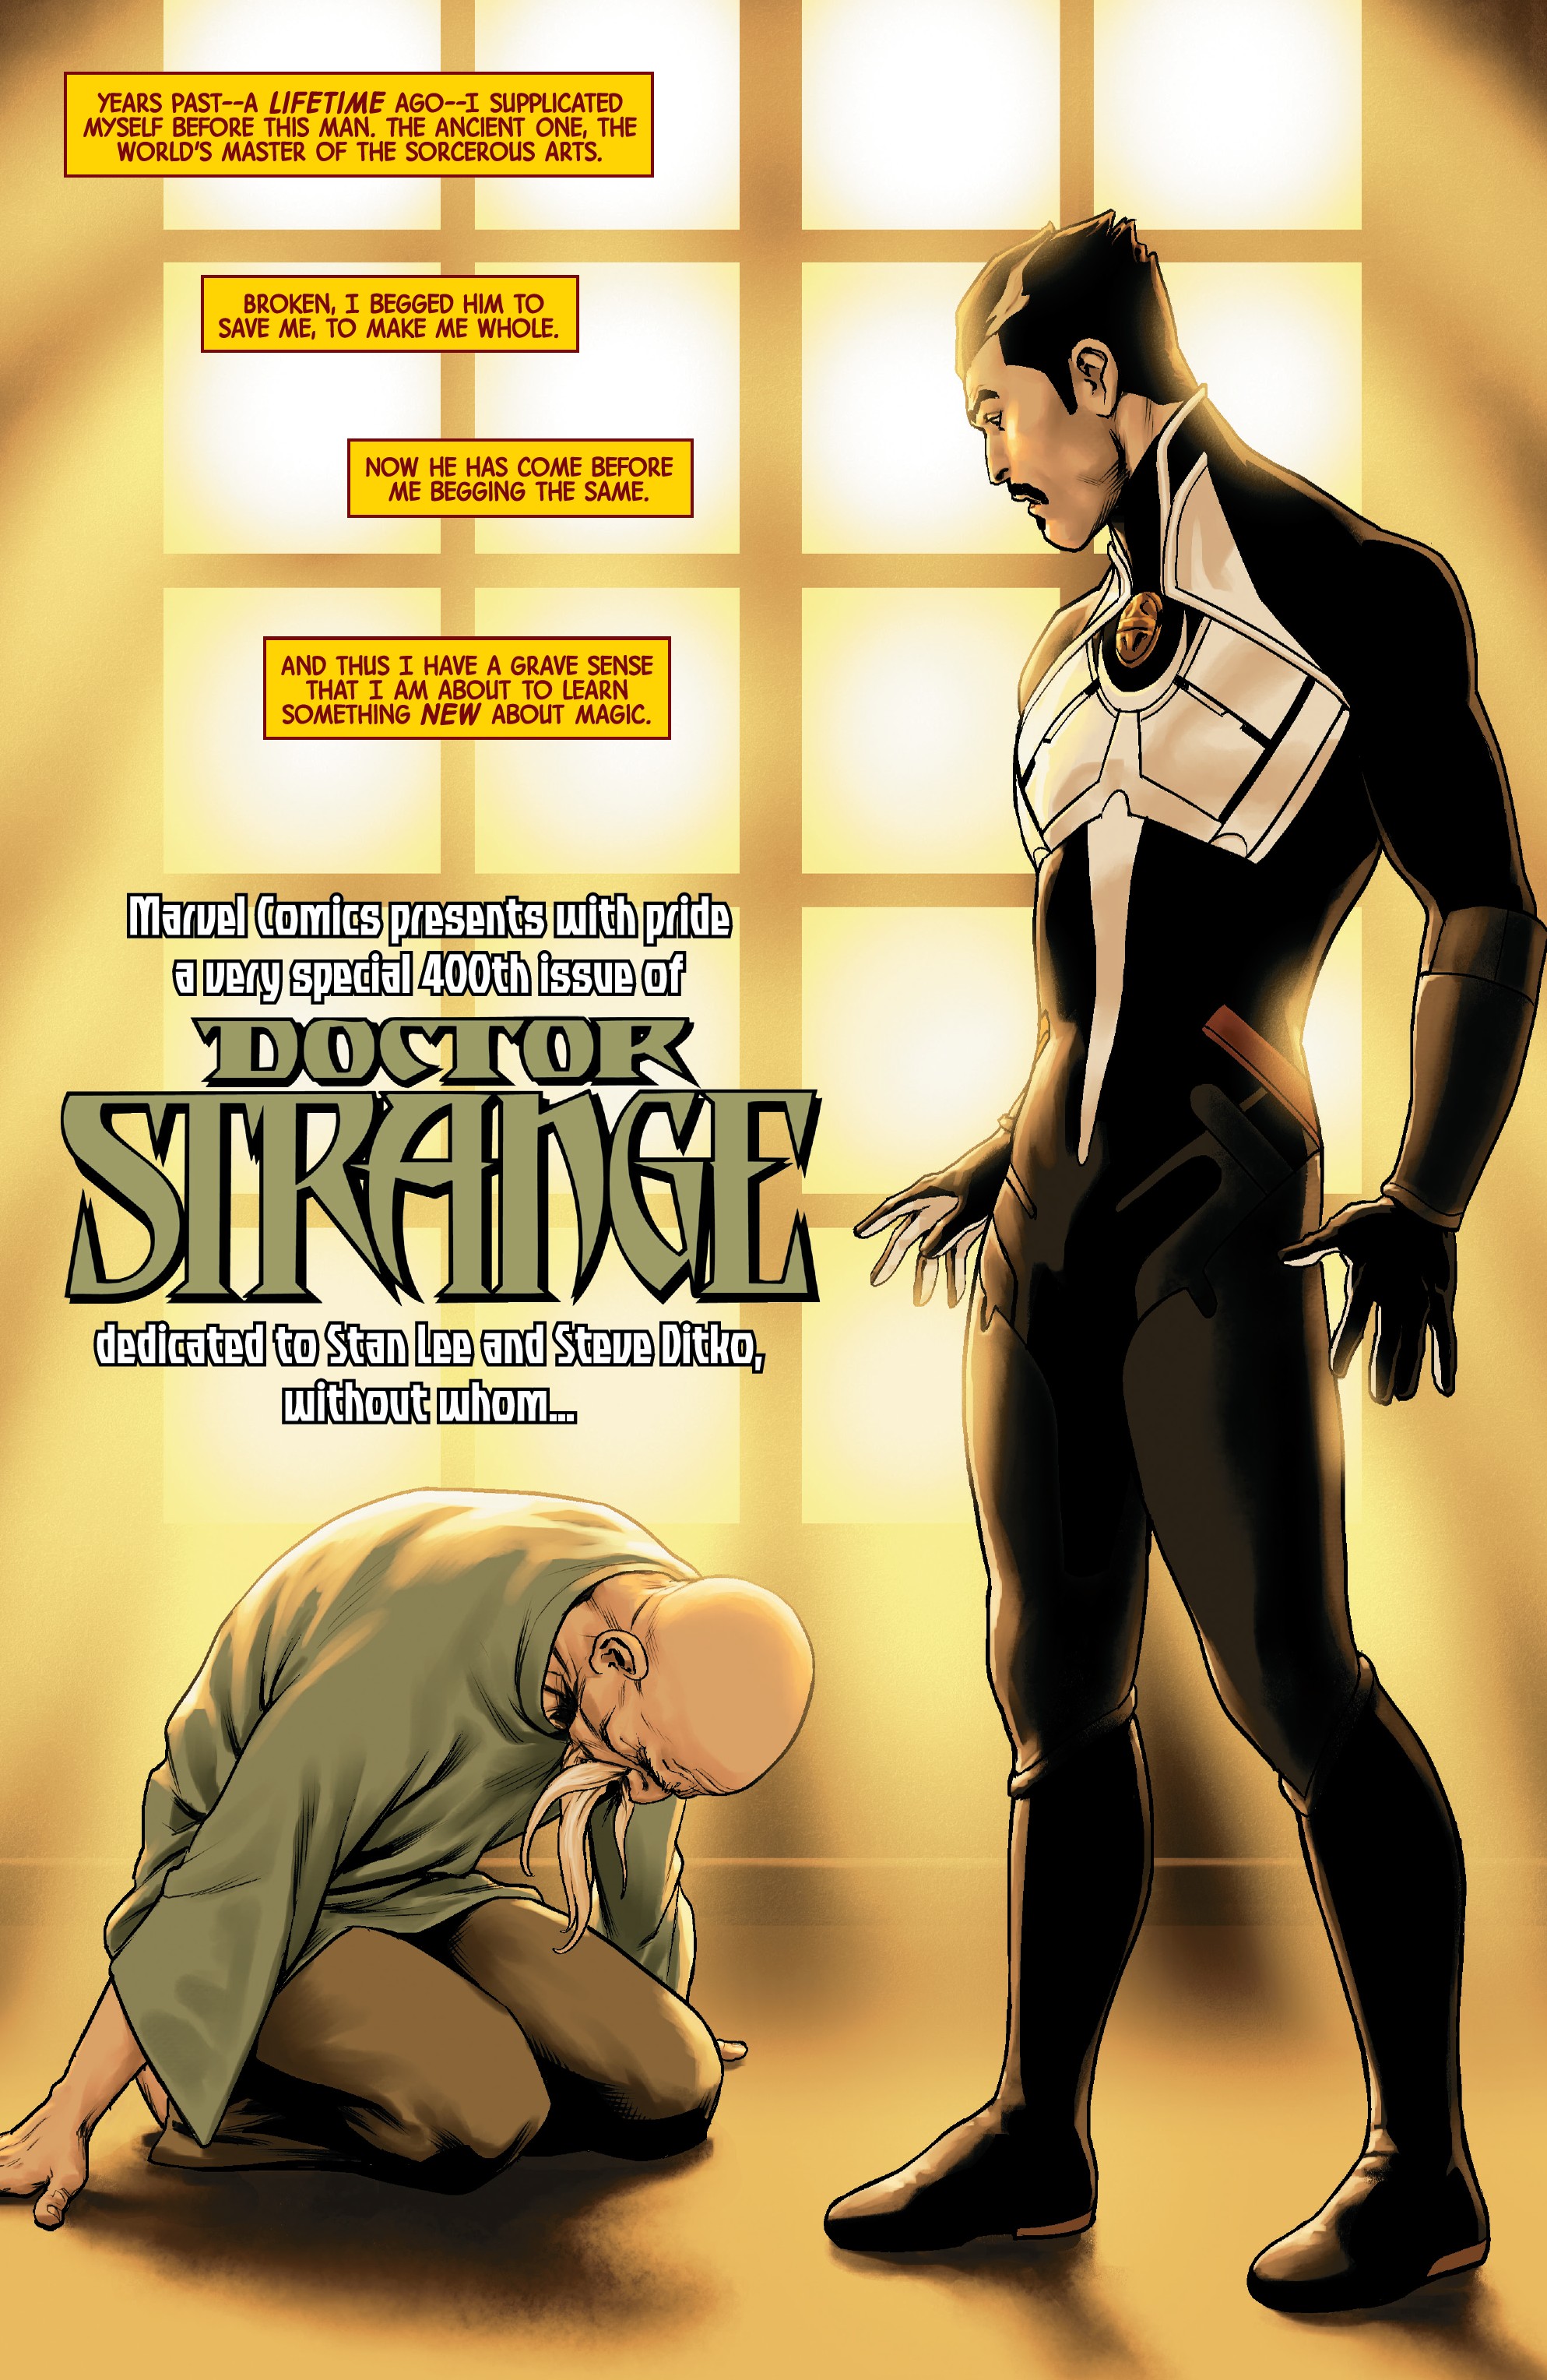 Doctor Strange 2018 Issue 10 | Read Doctor Strange 2018 Issue 10 comic  online in high quality. Read Full Comic online for free - Read comics  online in high quality .| READ COMIC ONLINE